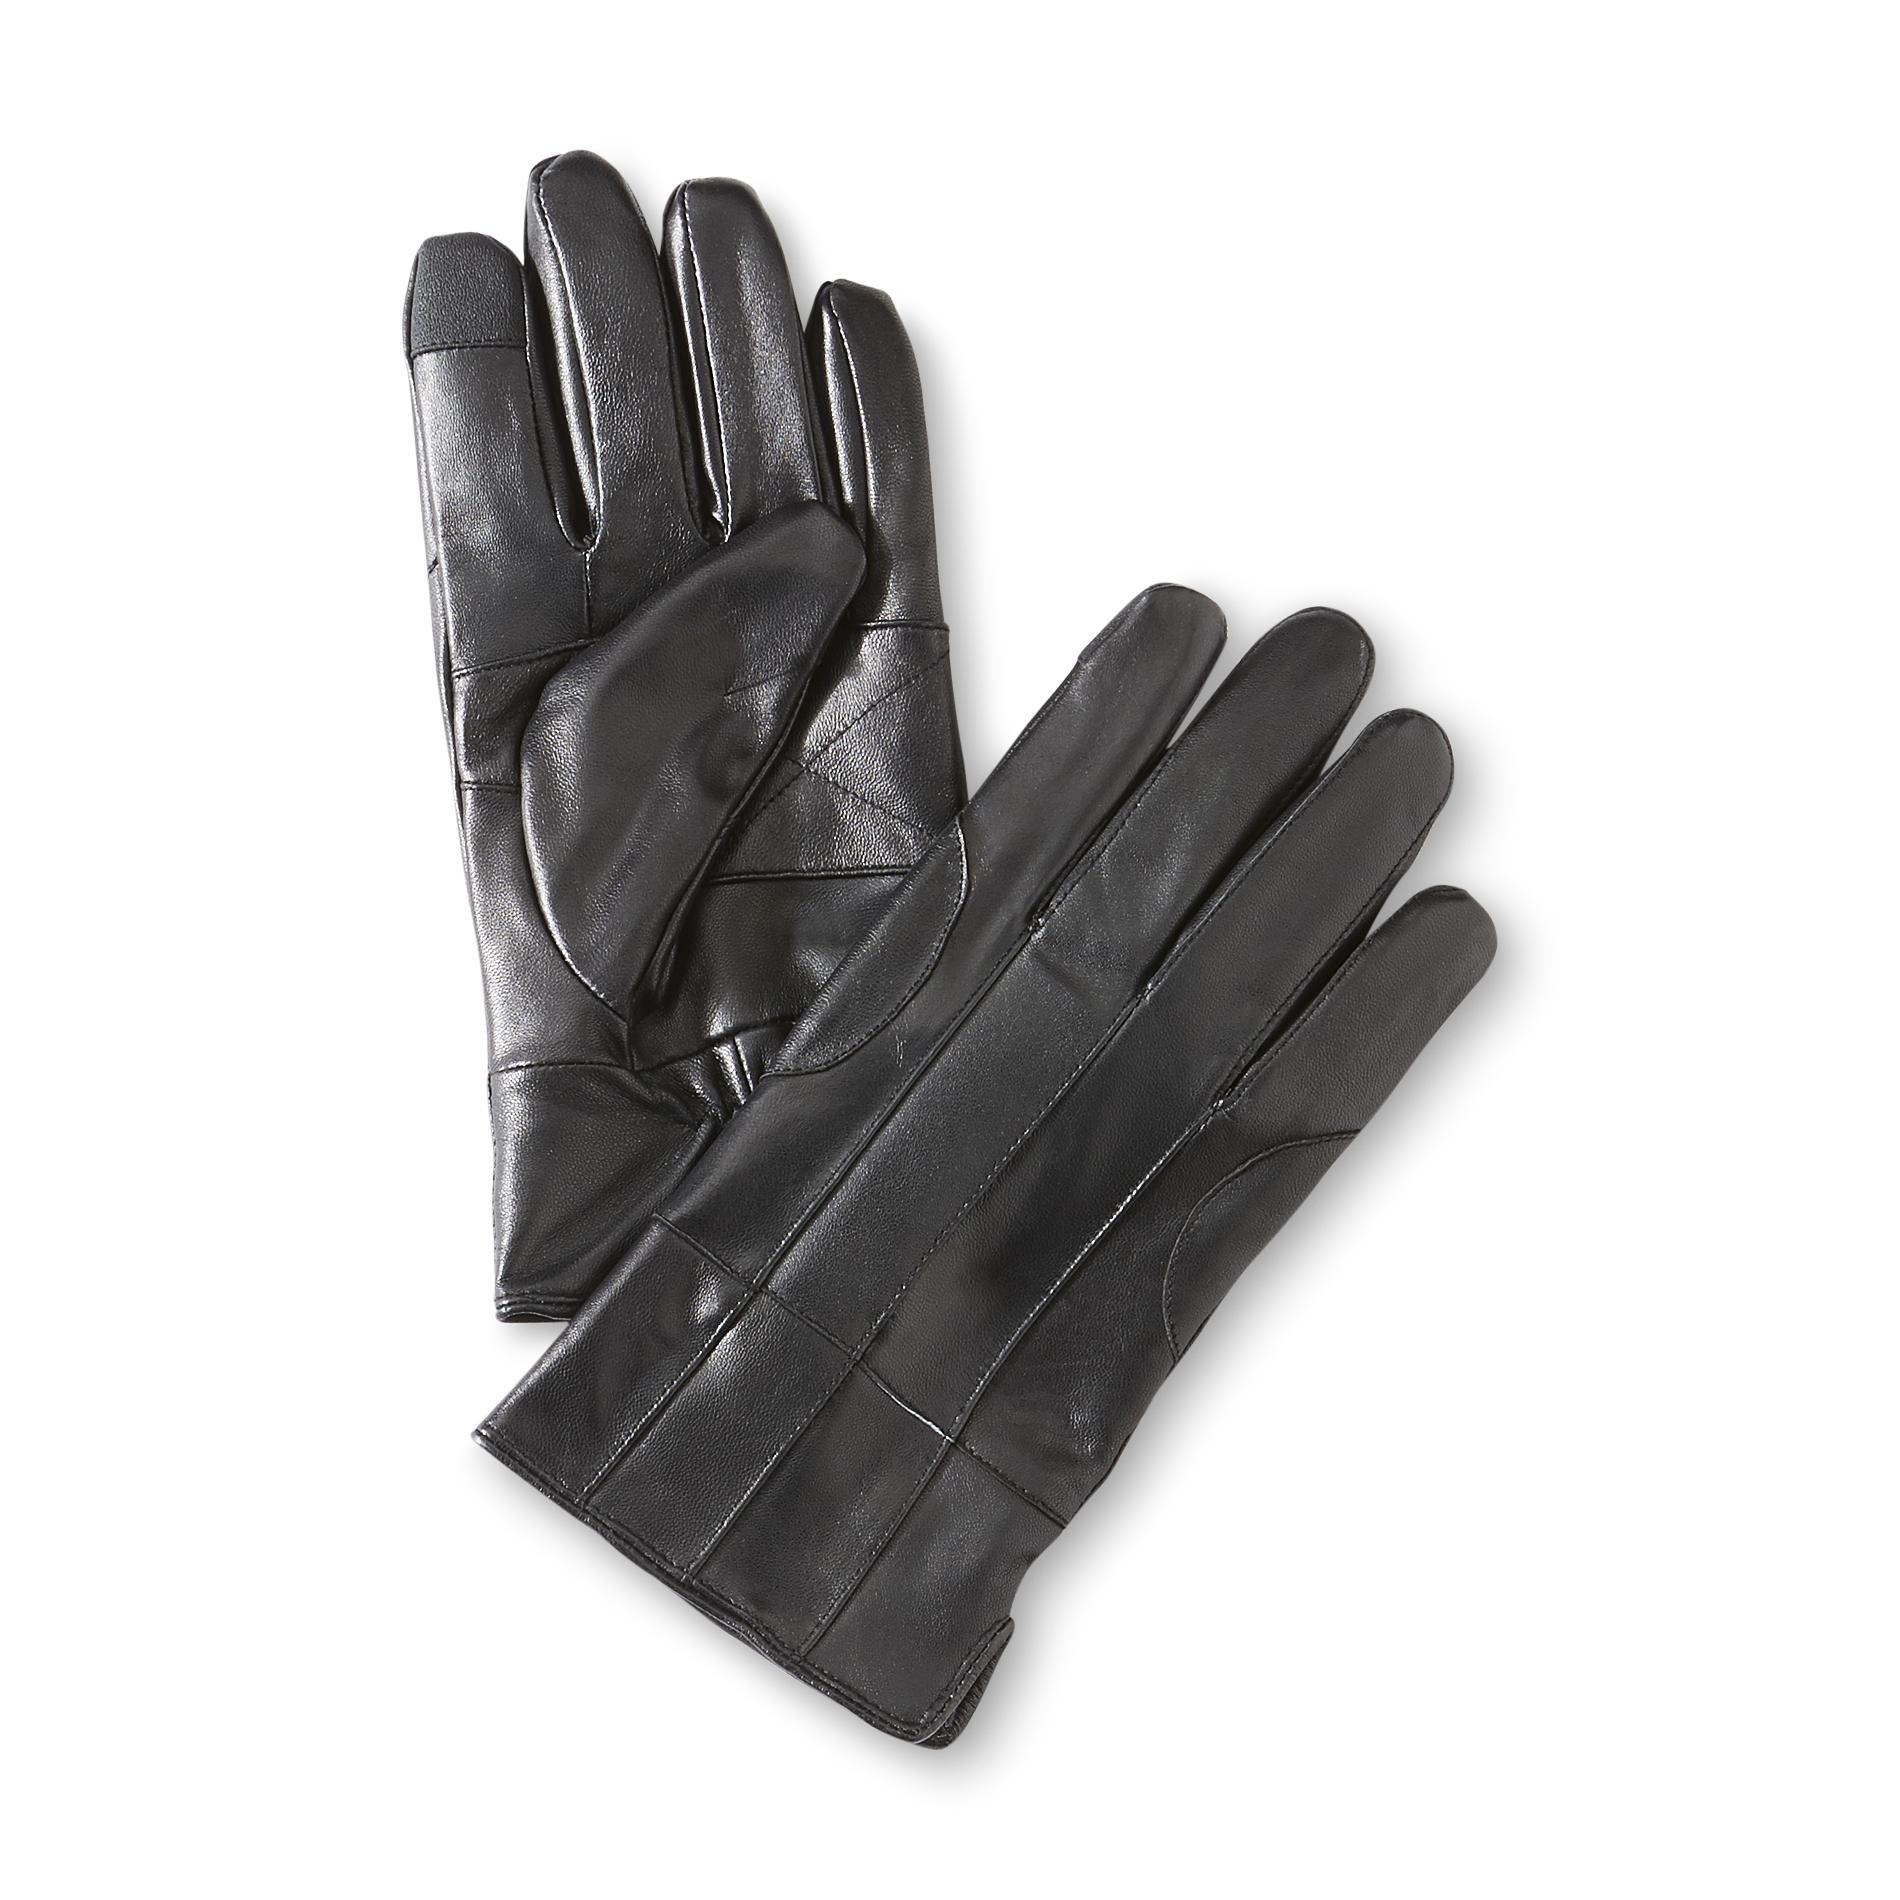 Attention Men's Insulated Leather Gloves